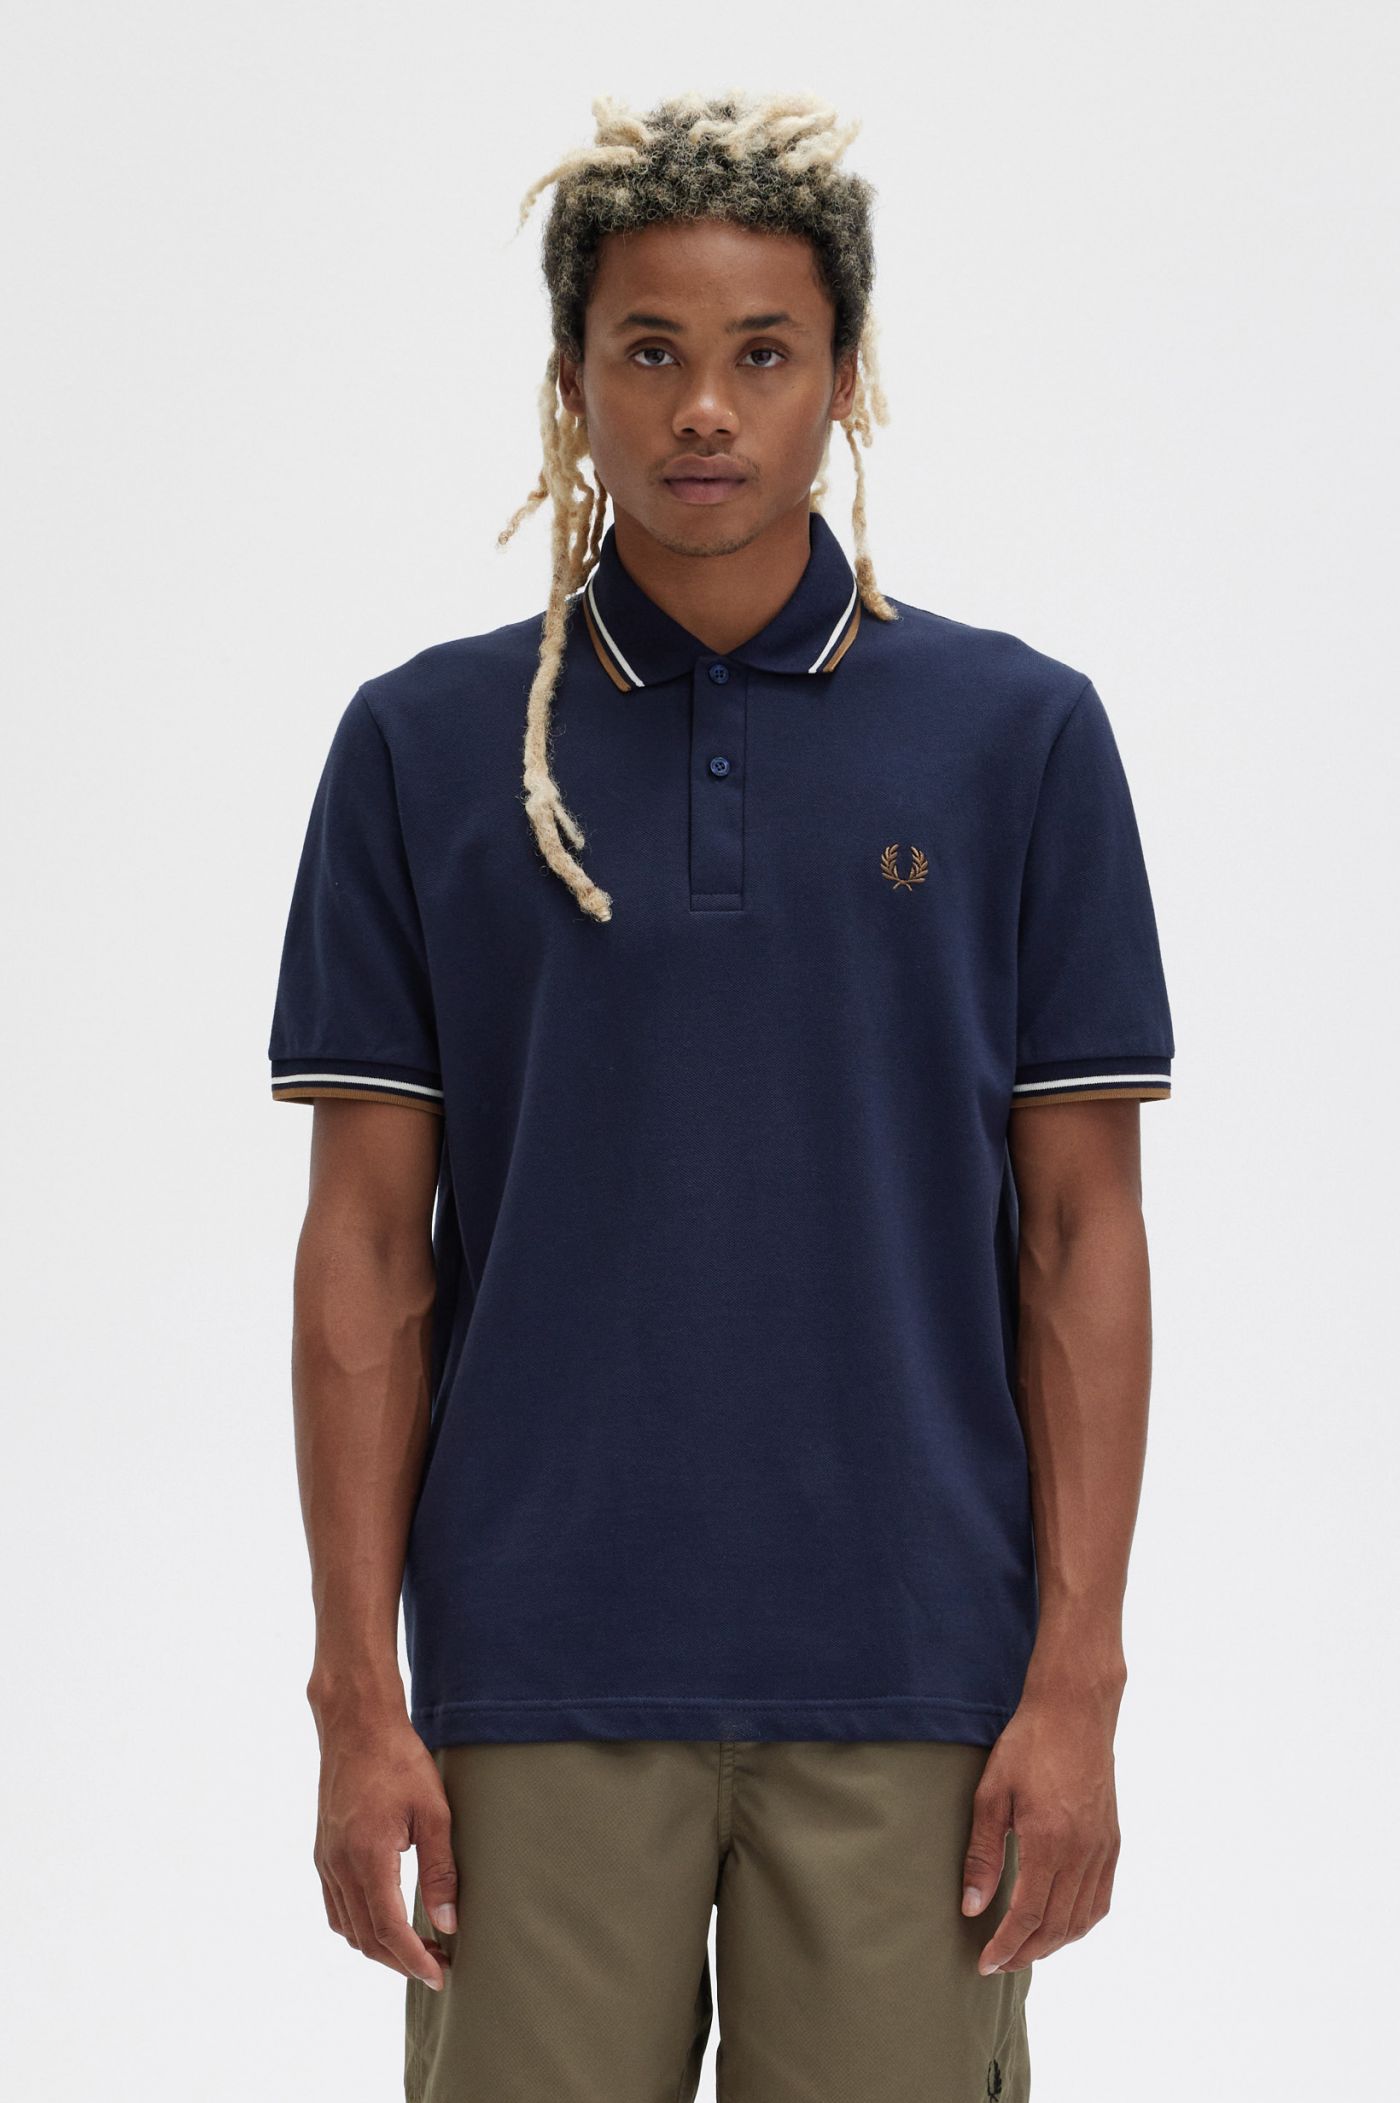 The Fred Perry Shirt - M12 - ポロシャツ